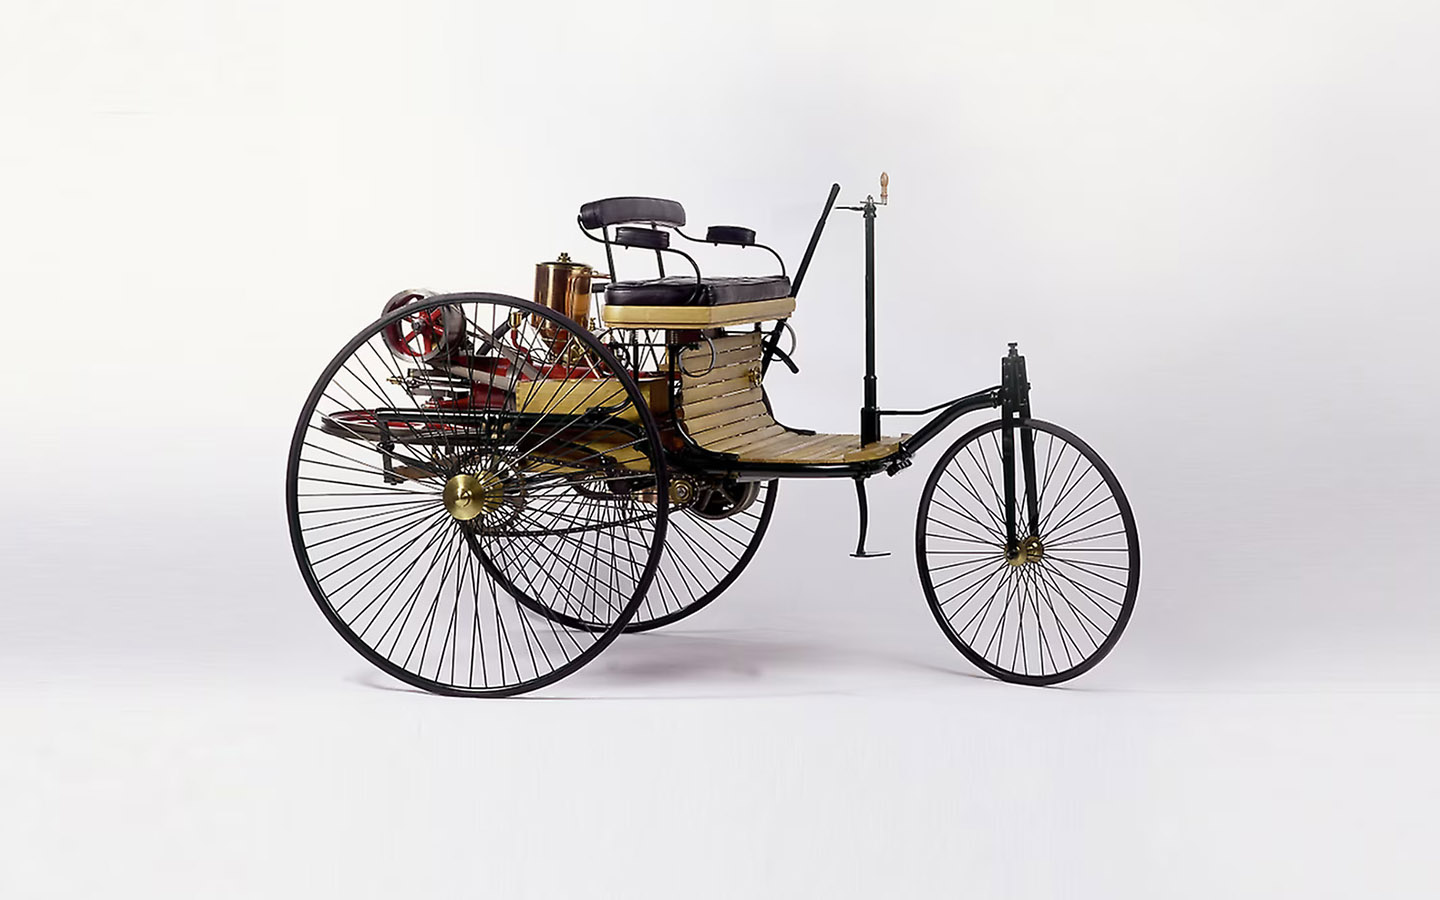 Benz Patent Motor Car holds the privilege of being the first car in mercedes-benz history 